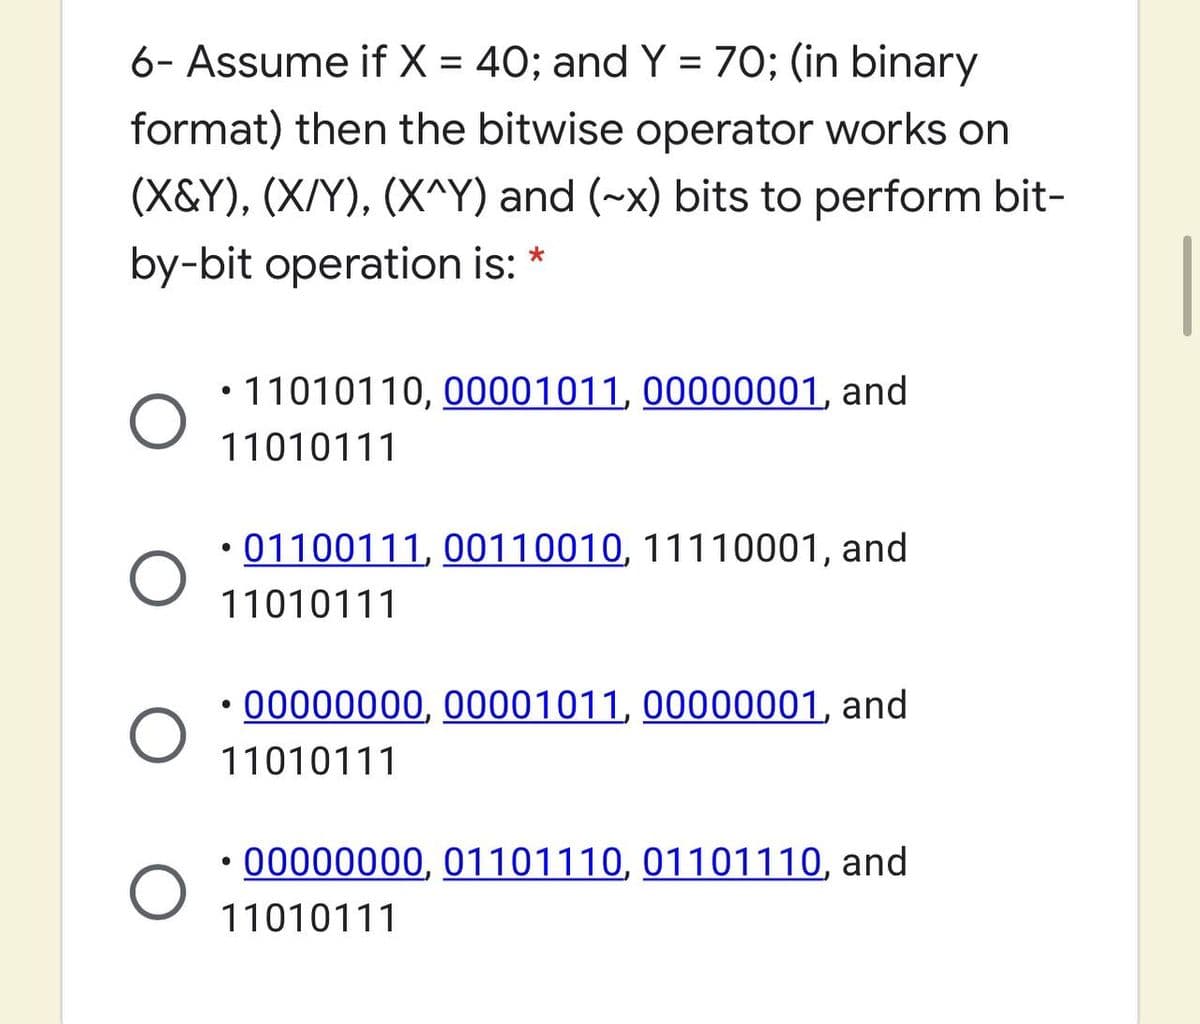 6- Assume if X = 40; and Y = 70; (in binary
%D
format) then the bitwise operator works on
(X&Y), (X/Y), (X^Y) and (~x) bits to perform bit-
by-bit operation is:
• 11010110, 00001011, 00000001, and
11010111
• 01100111, 00110010, 11110001, and
11010111
• 00000000, 00001011, 00000001, and
11010111
• 00000000, 01101110, 01101110, and
11010111
